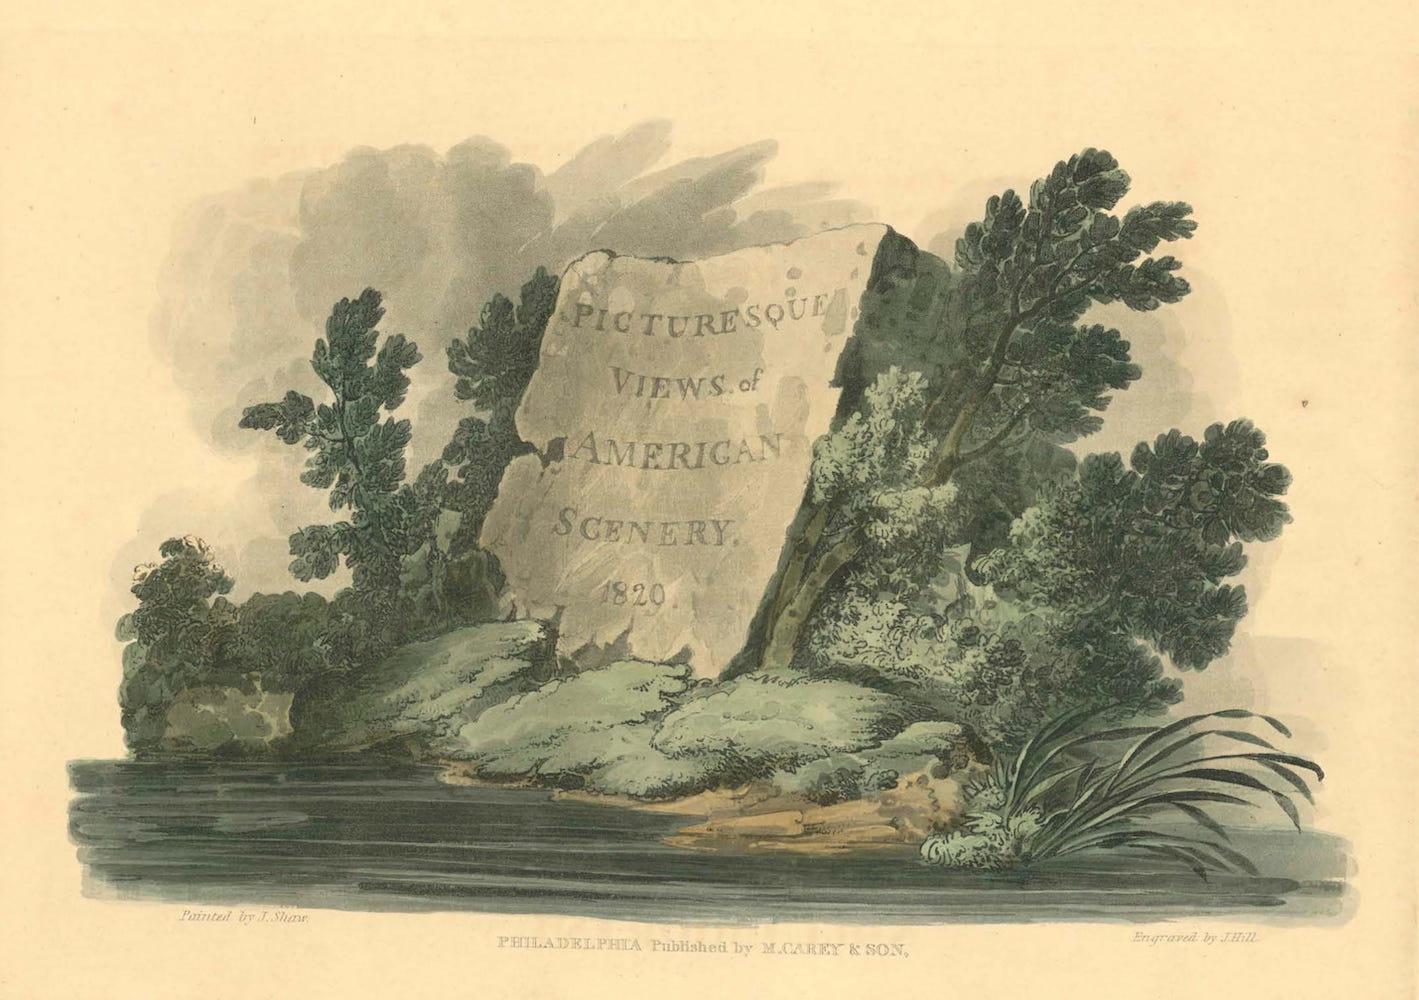 Picturesque Views of American Scenery (1820)